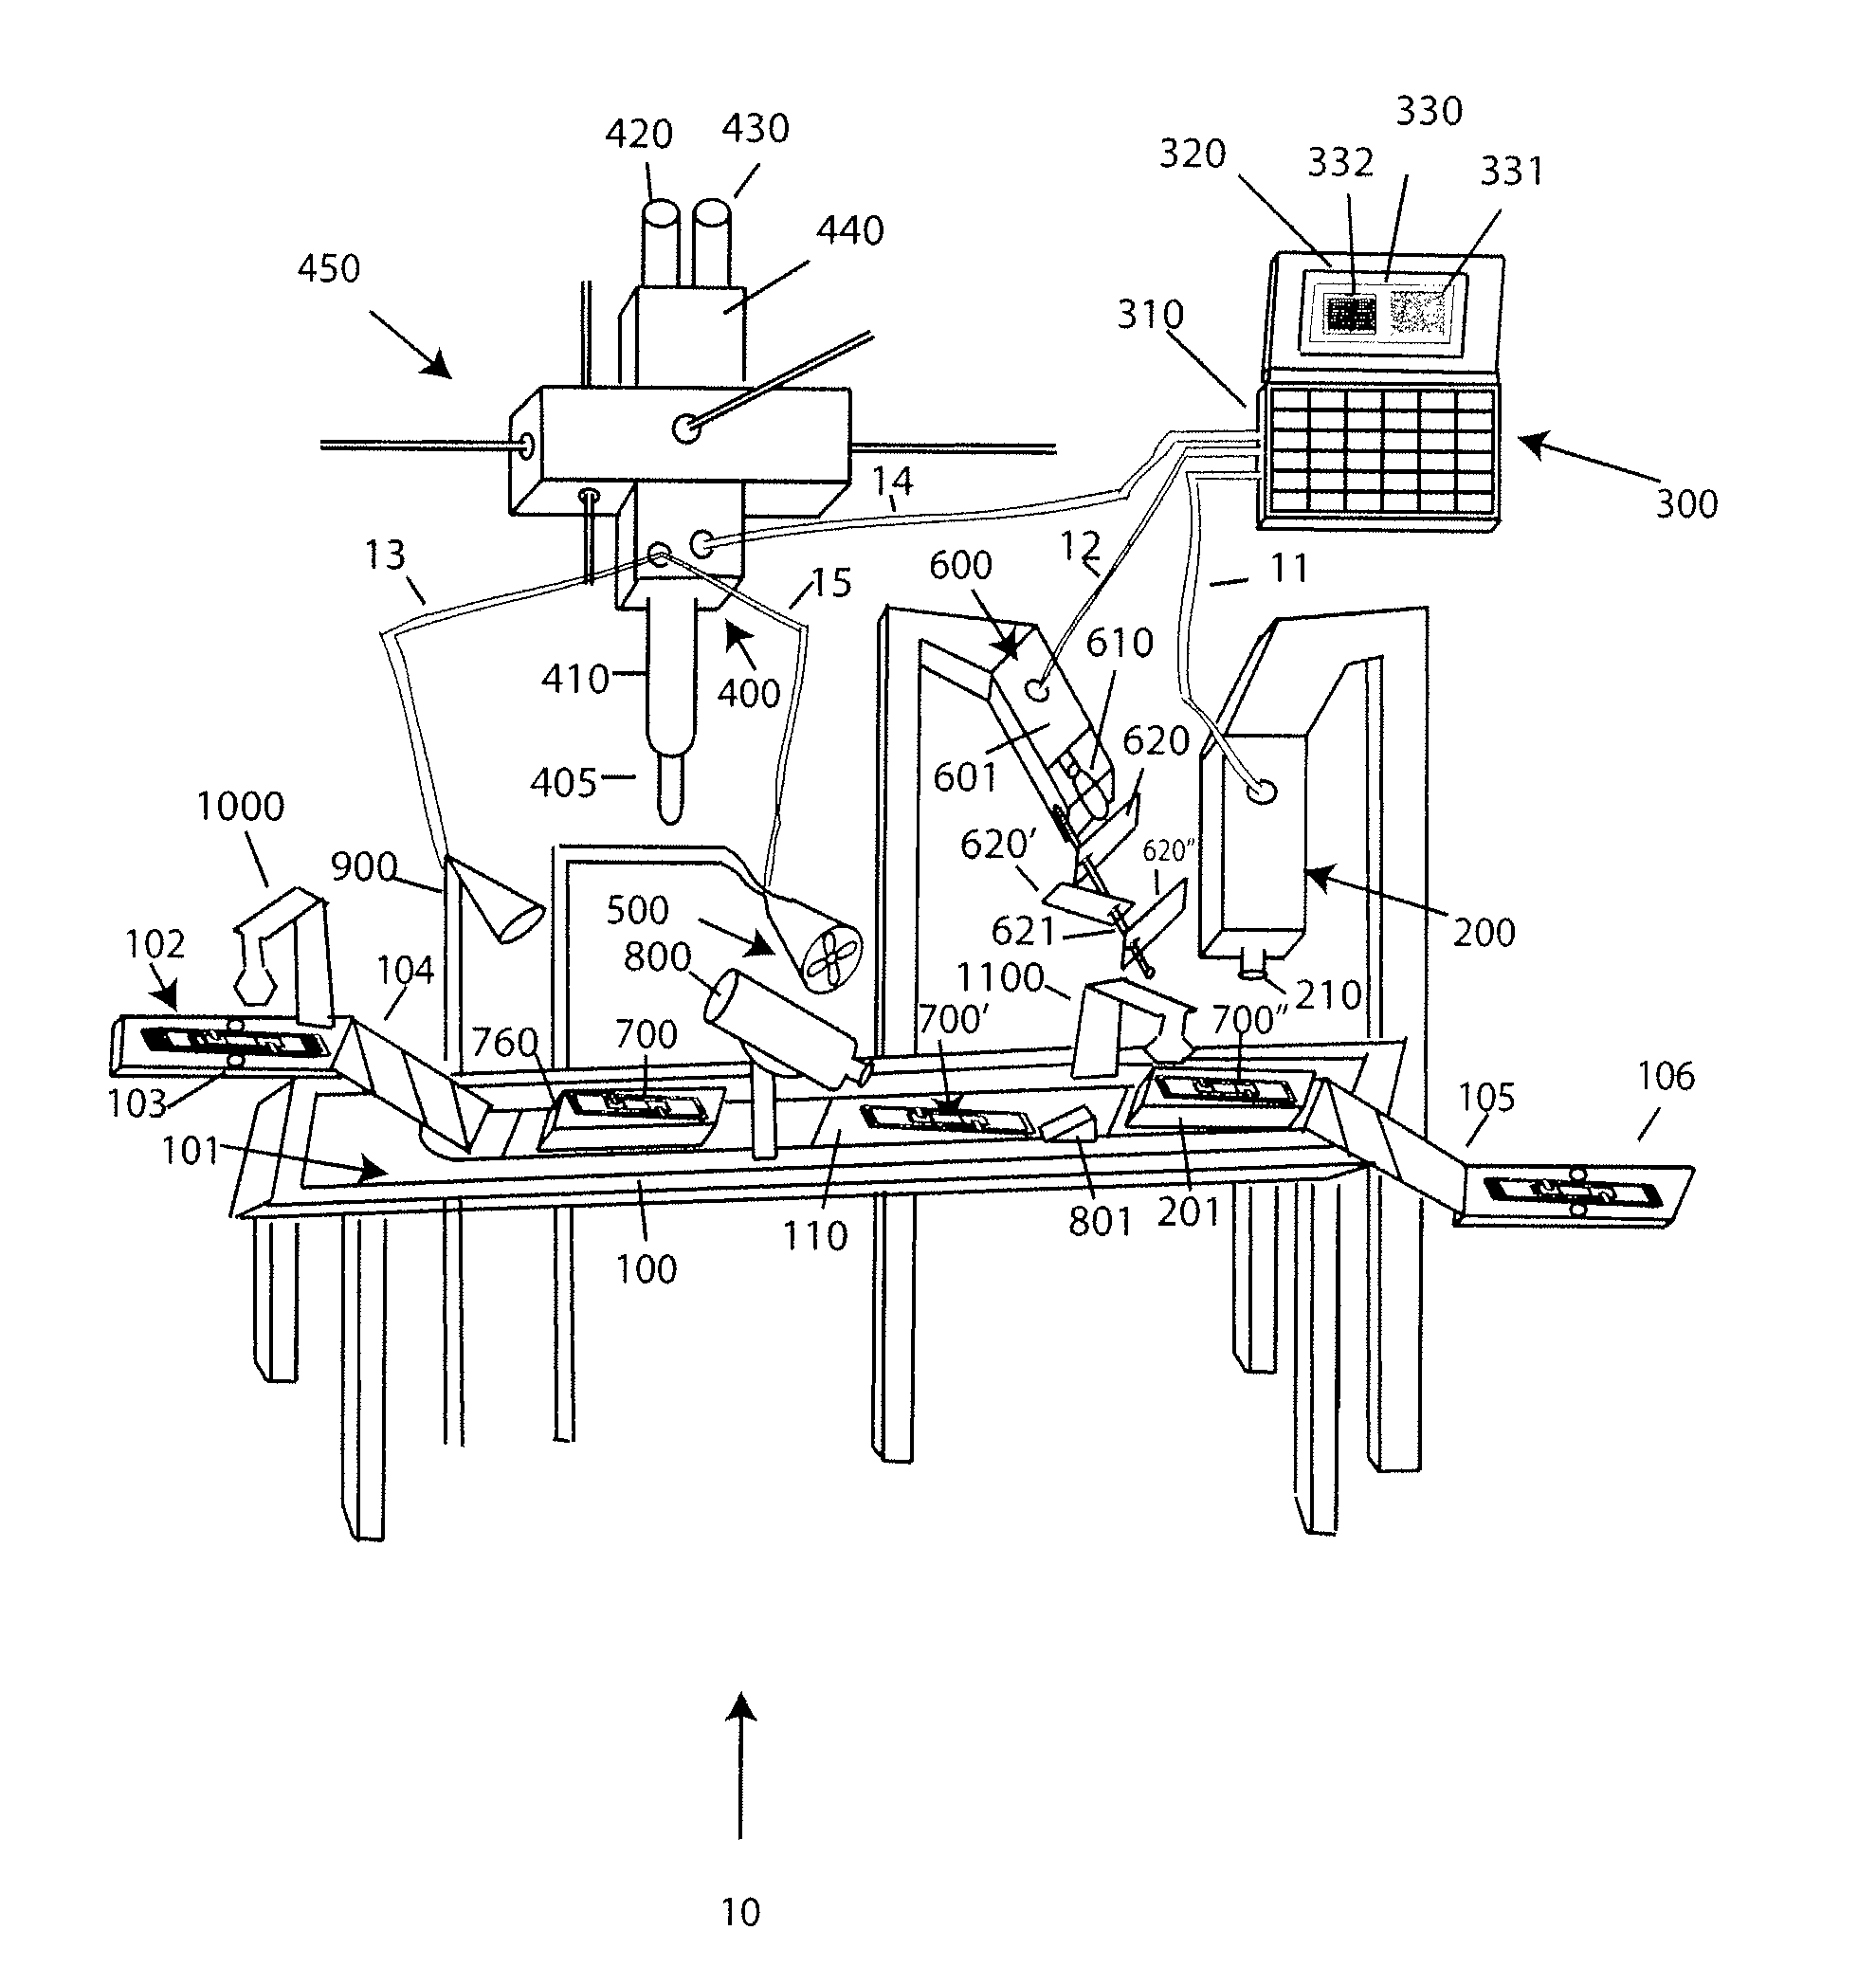 Systems and Methods for Analyzing Body Fluids